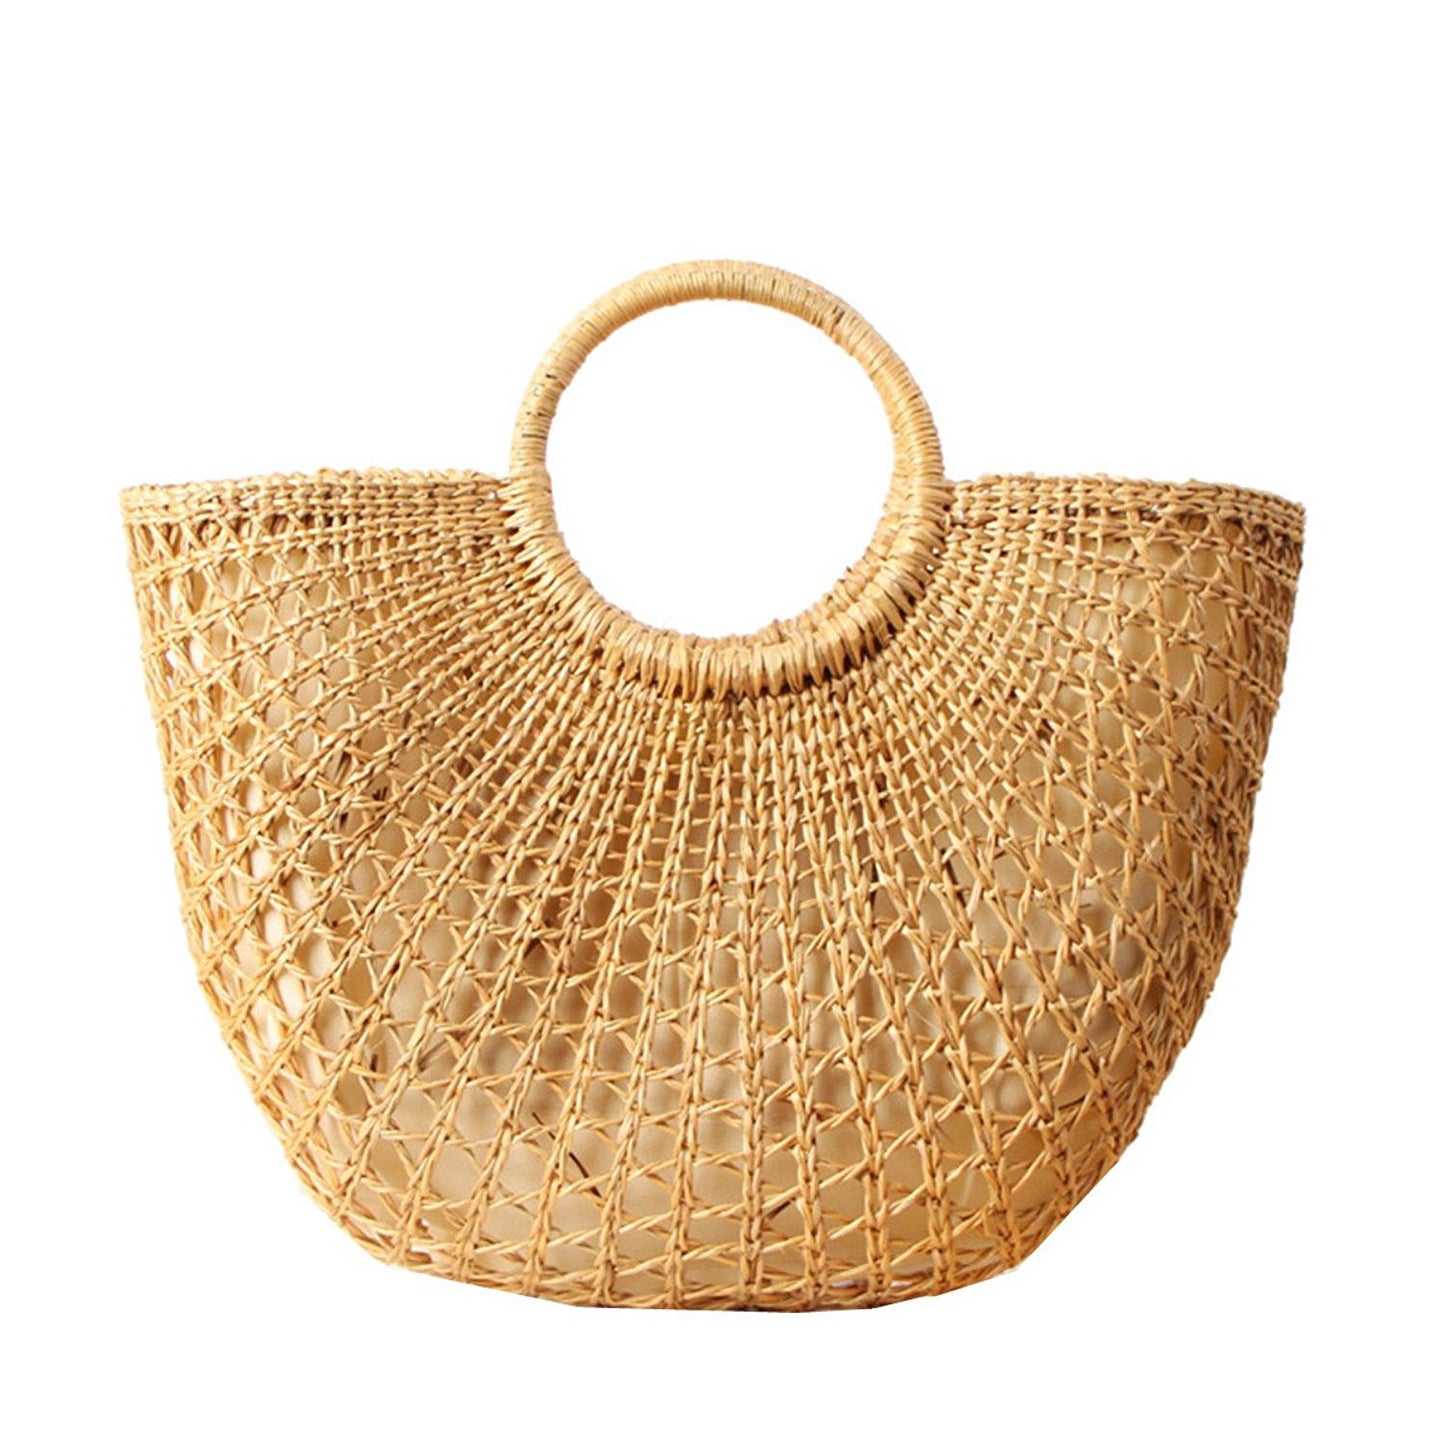 Women Vintage Straw Woven Handbags Large Casual Summer Beach Tote Bags back